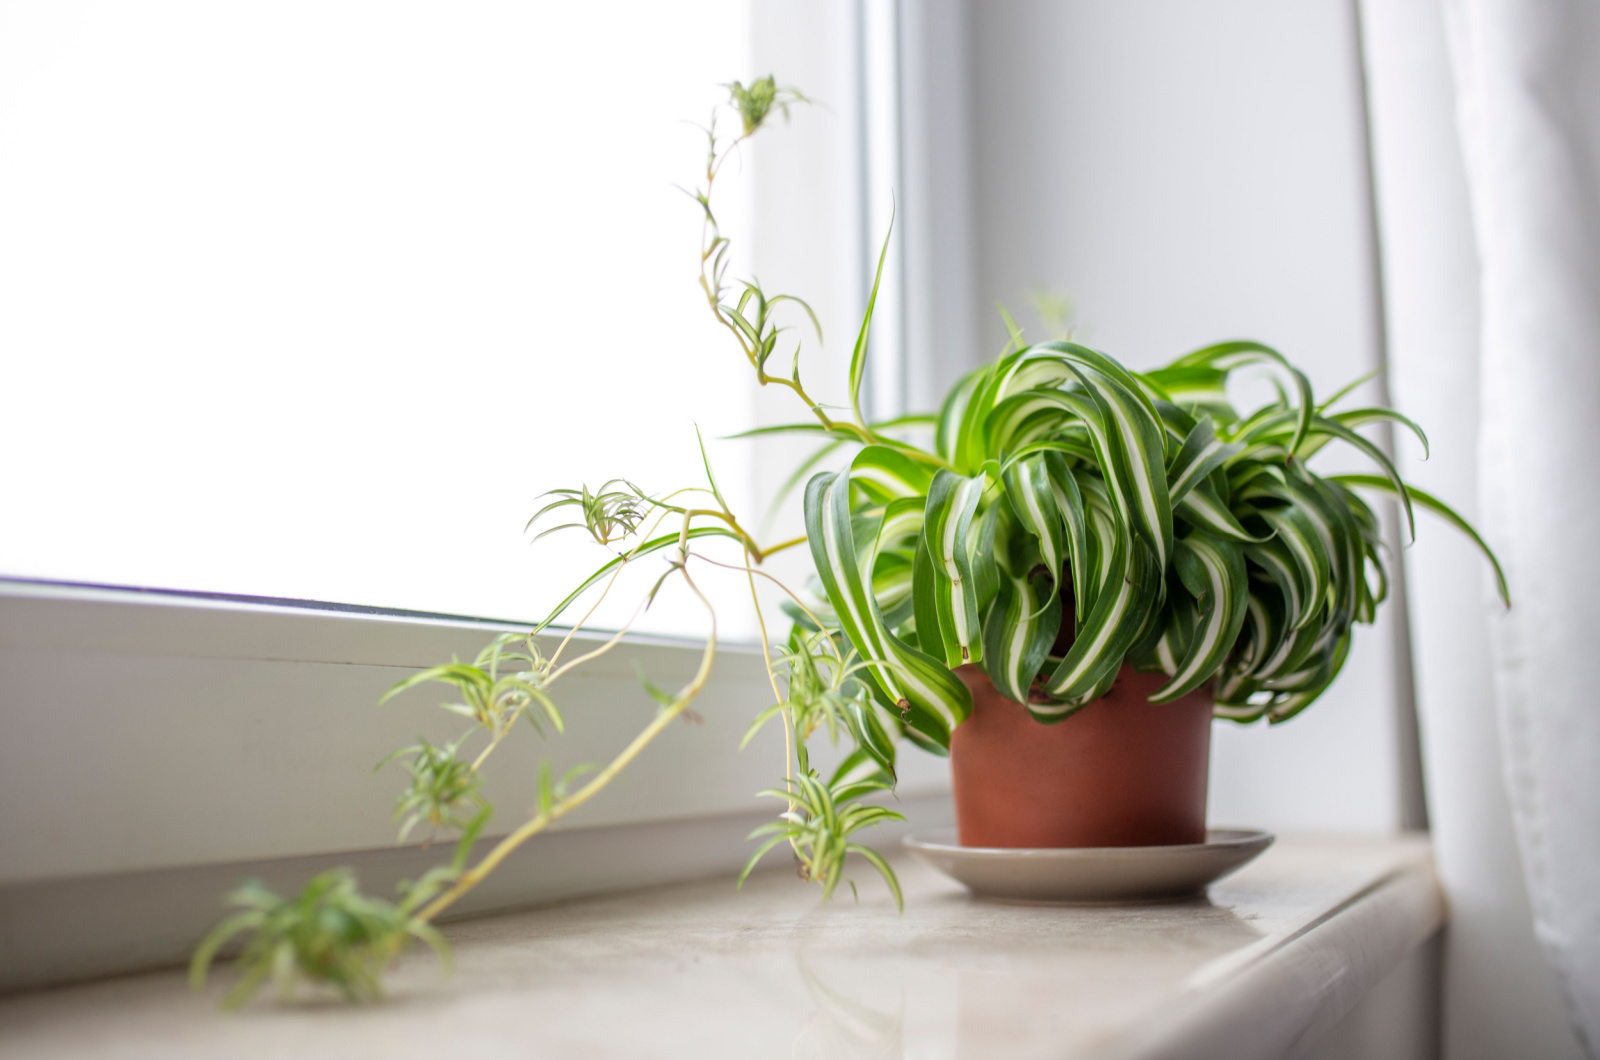 Spider plant on the window